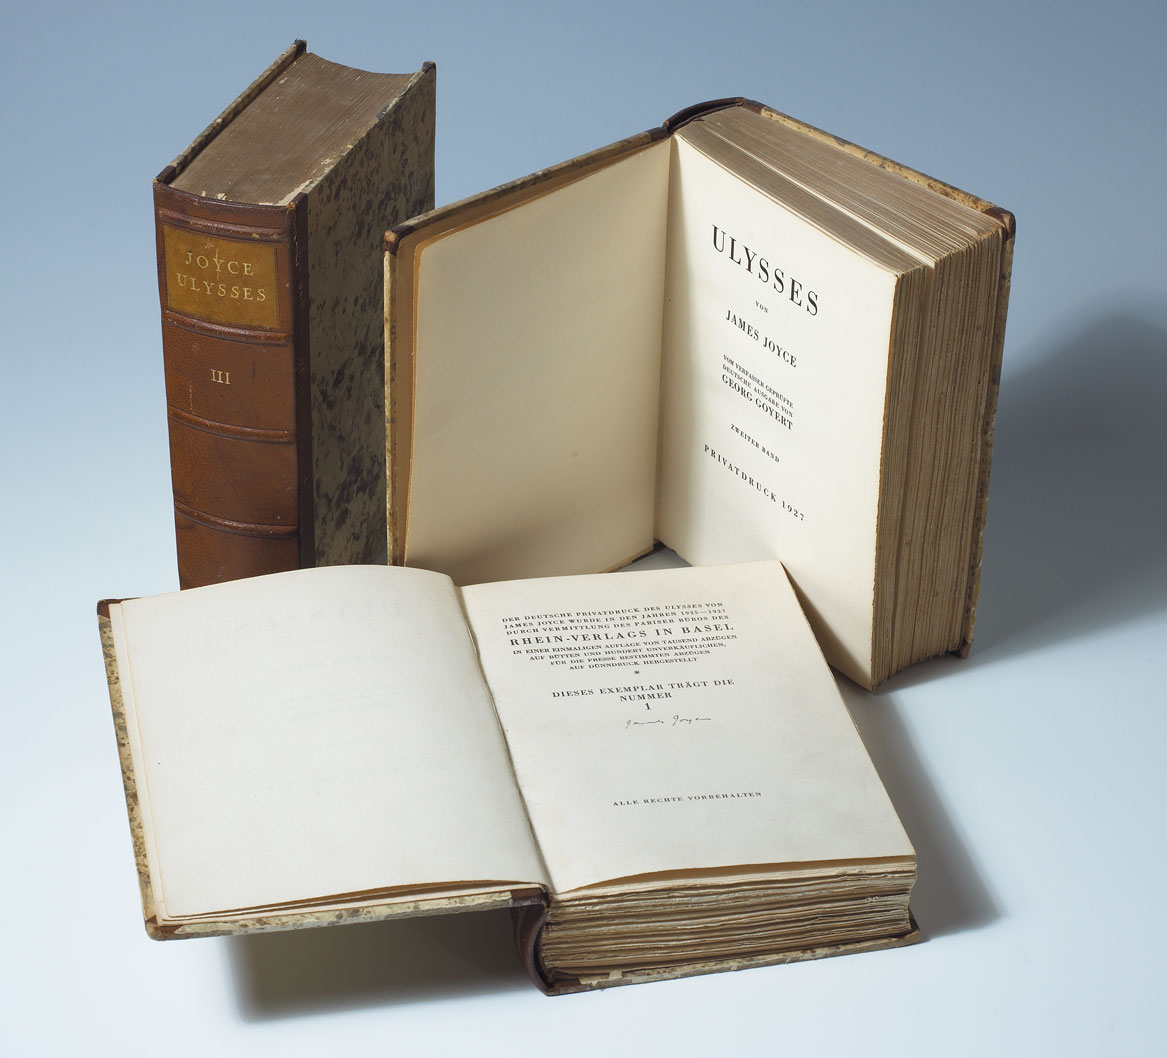 James Joyce, Ulysses signed German edition number one in three volumes. at Whyte's Auctions